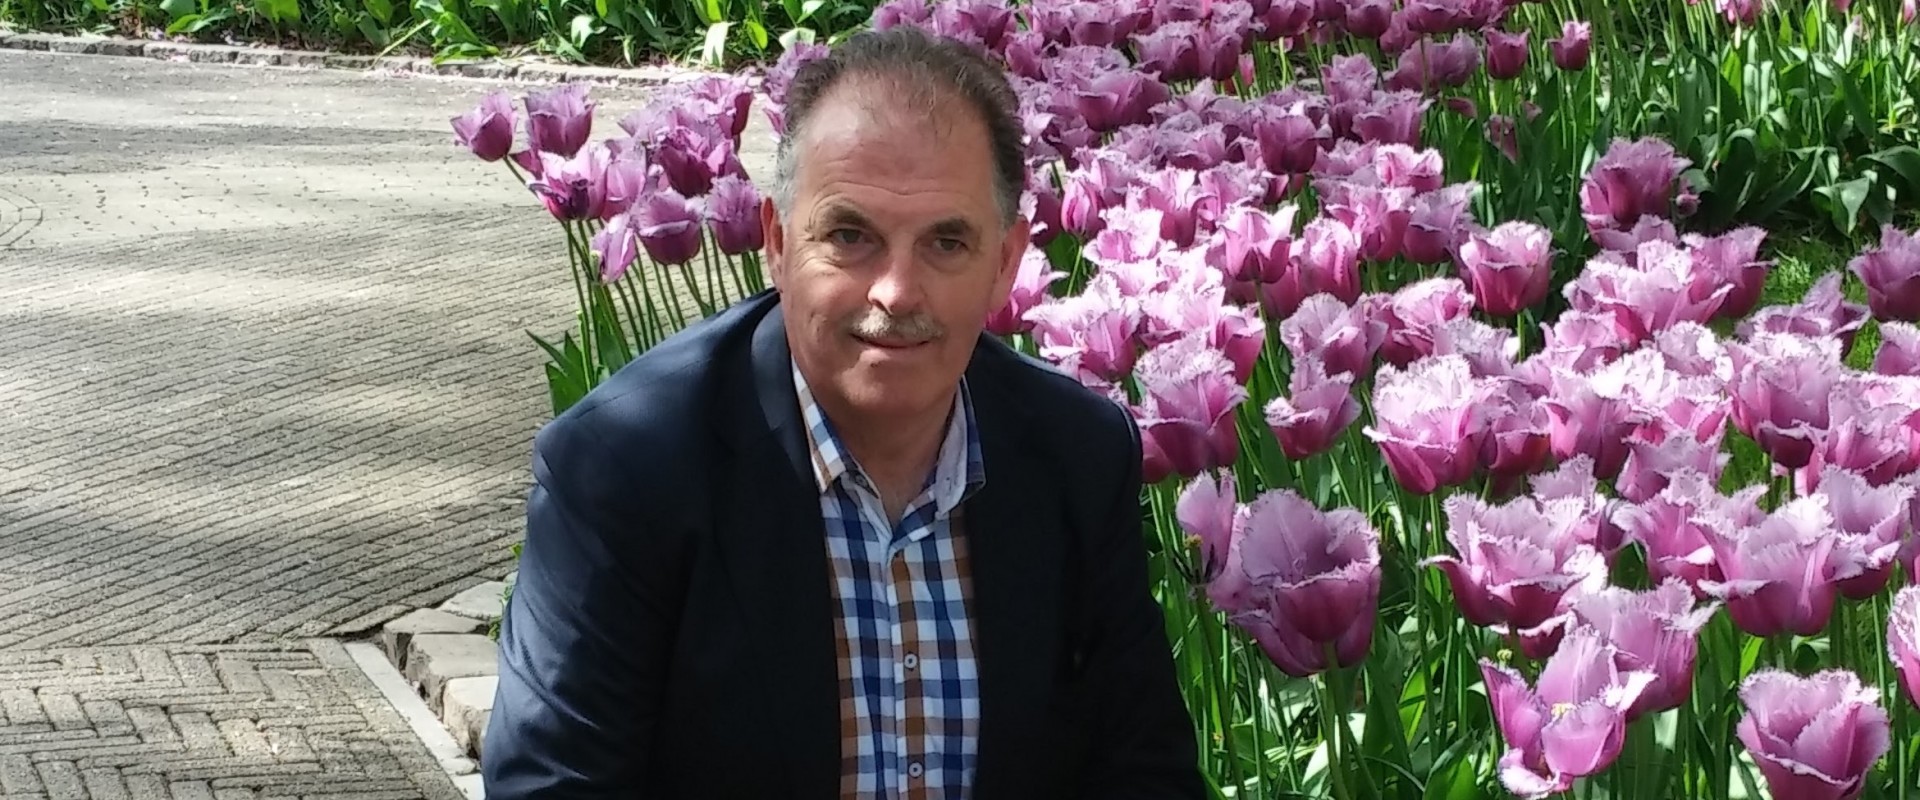 Founder of Flower Tours Holland | Peter Boers